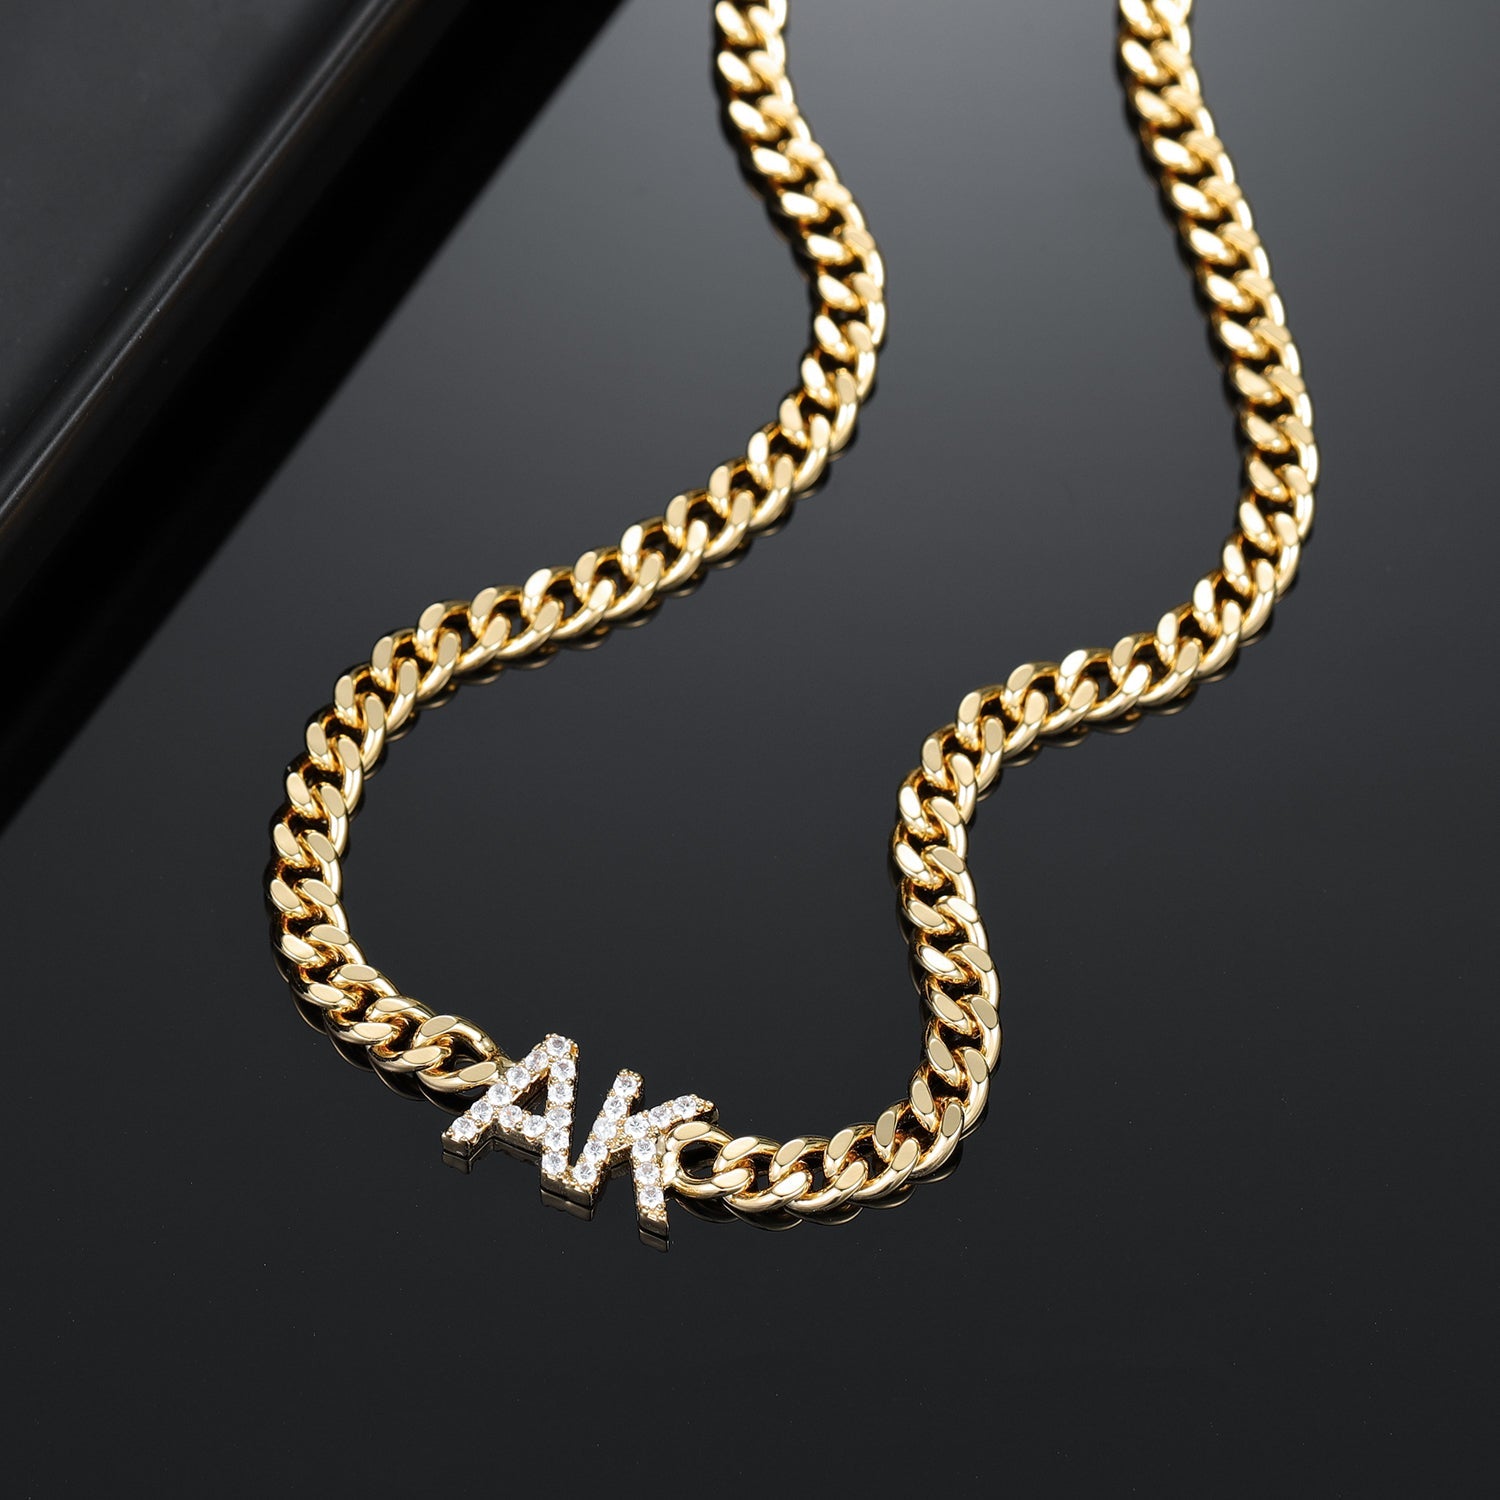 Iced Initials Necklace w/ Cuban Chain